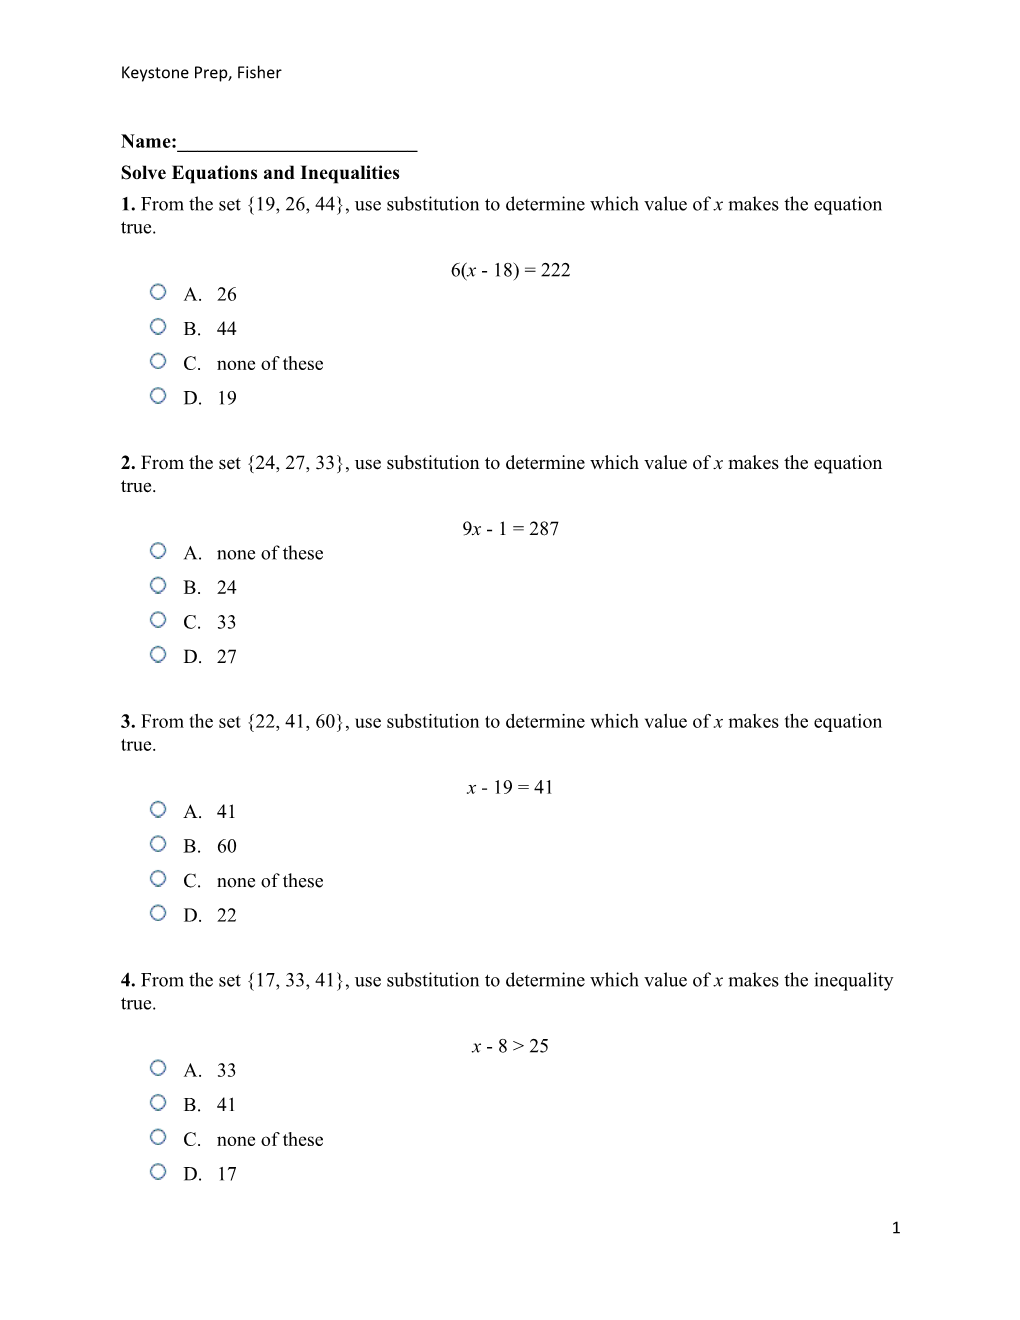 Solve Equations and Inequalities